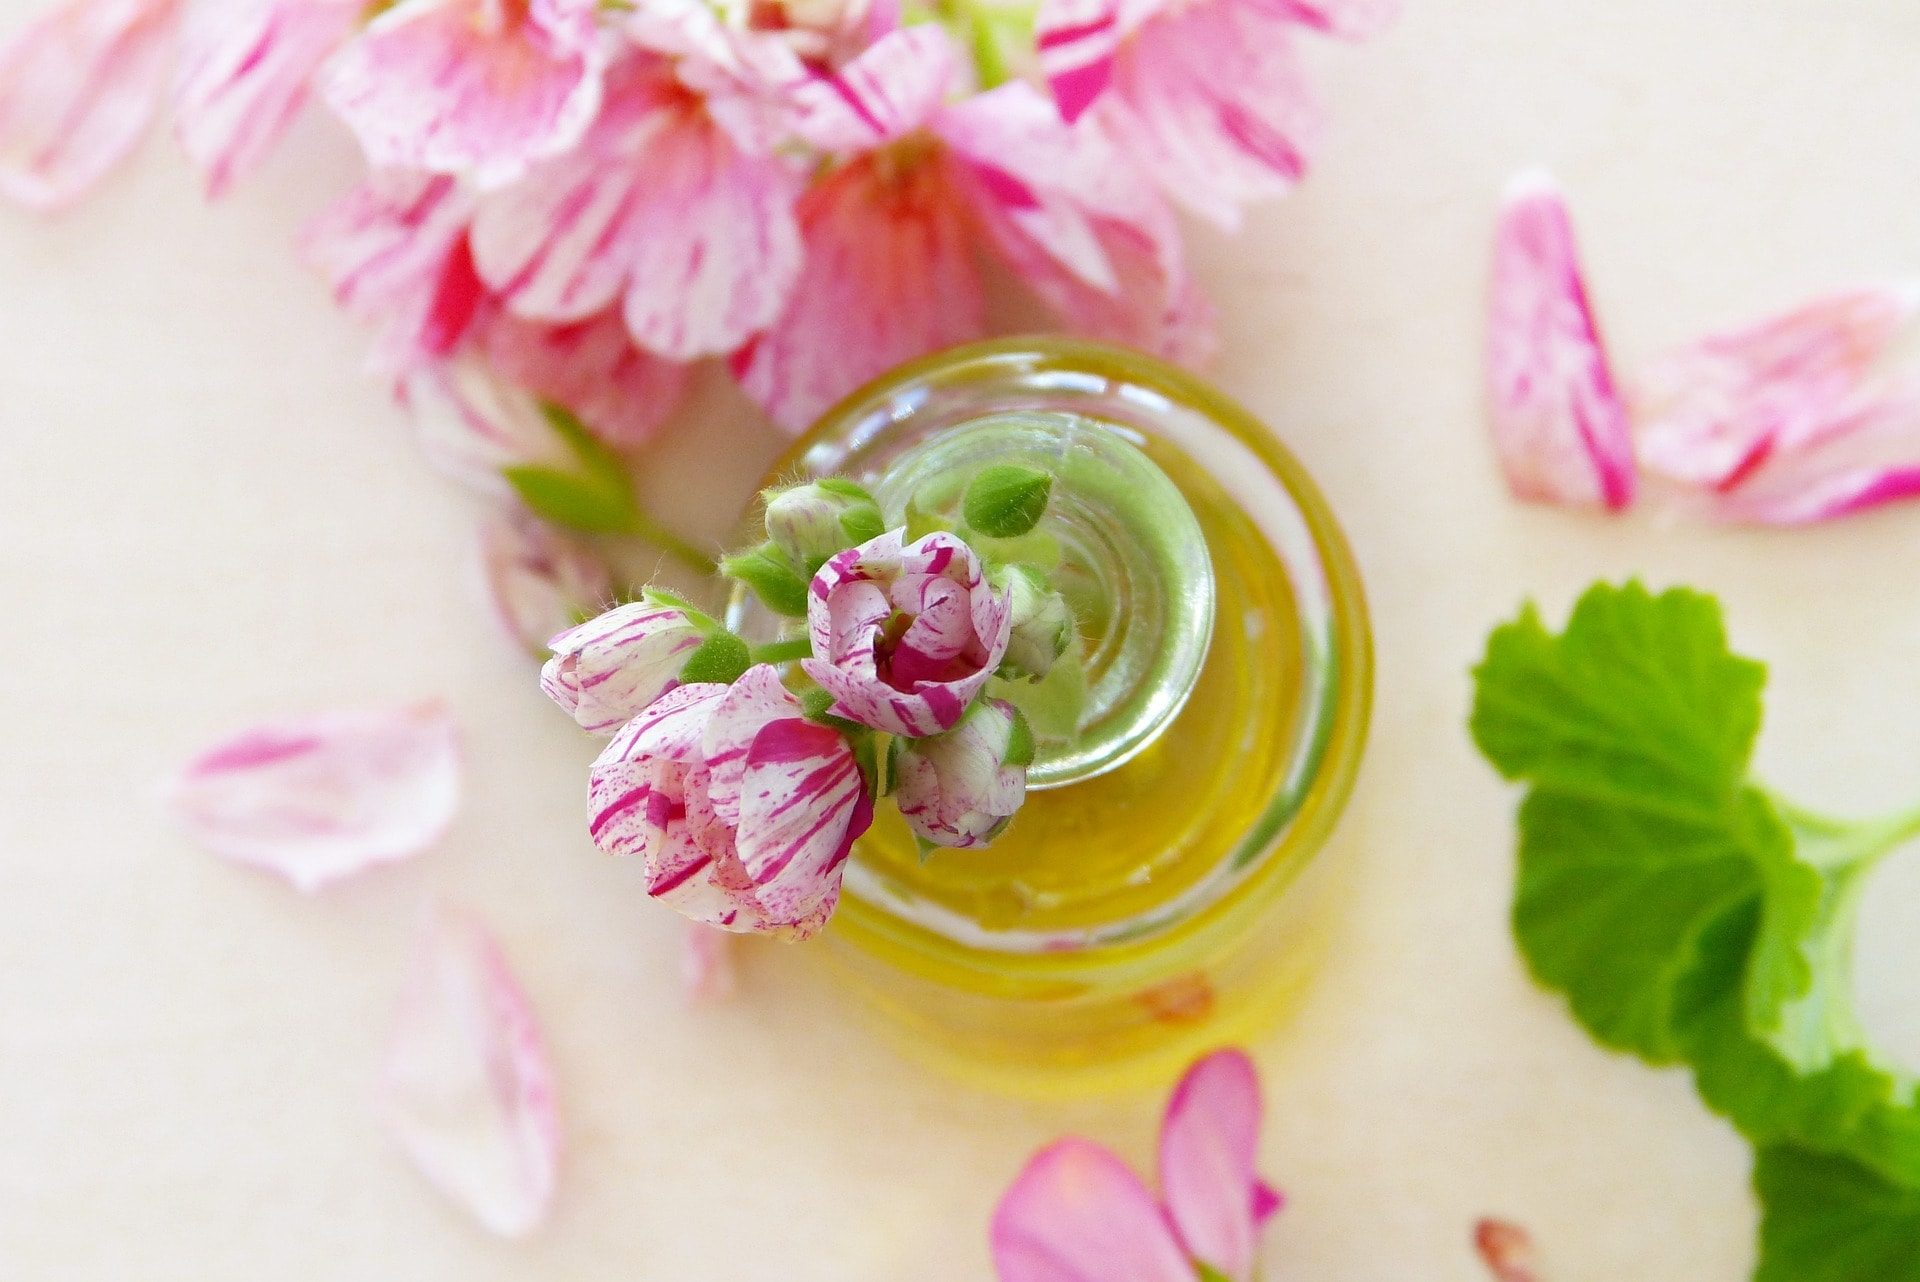 10 Best Essential Oils For Skin Care And How To Use Them